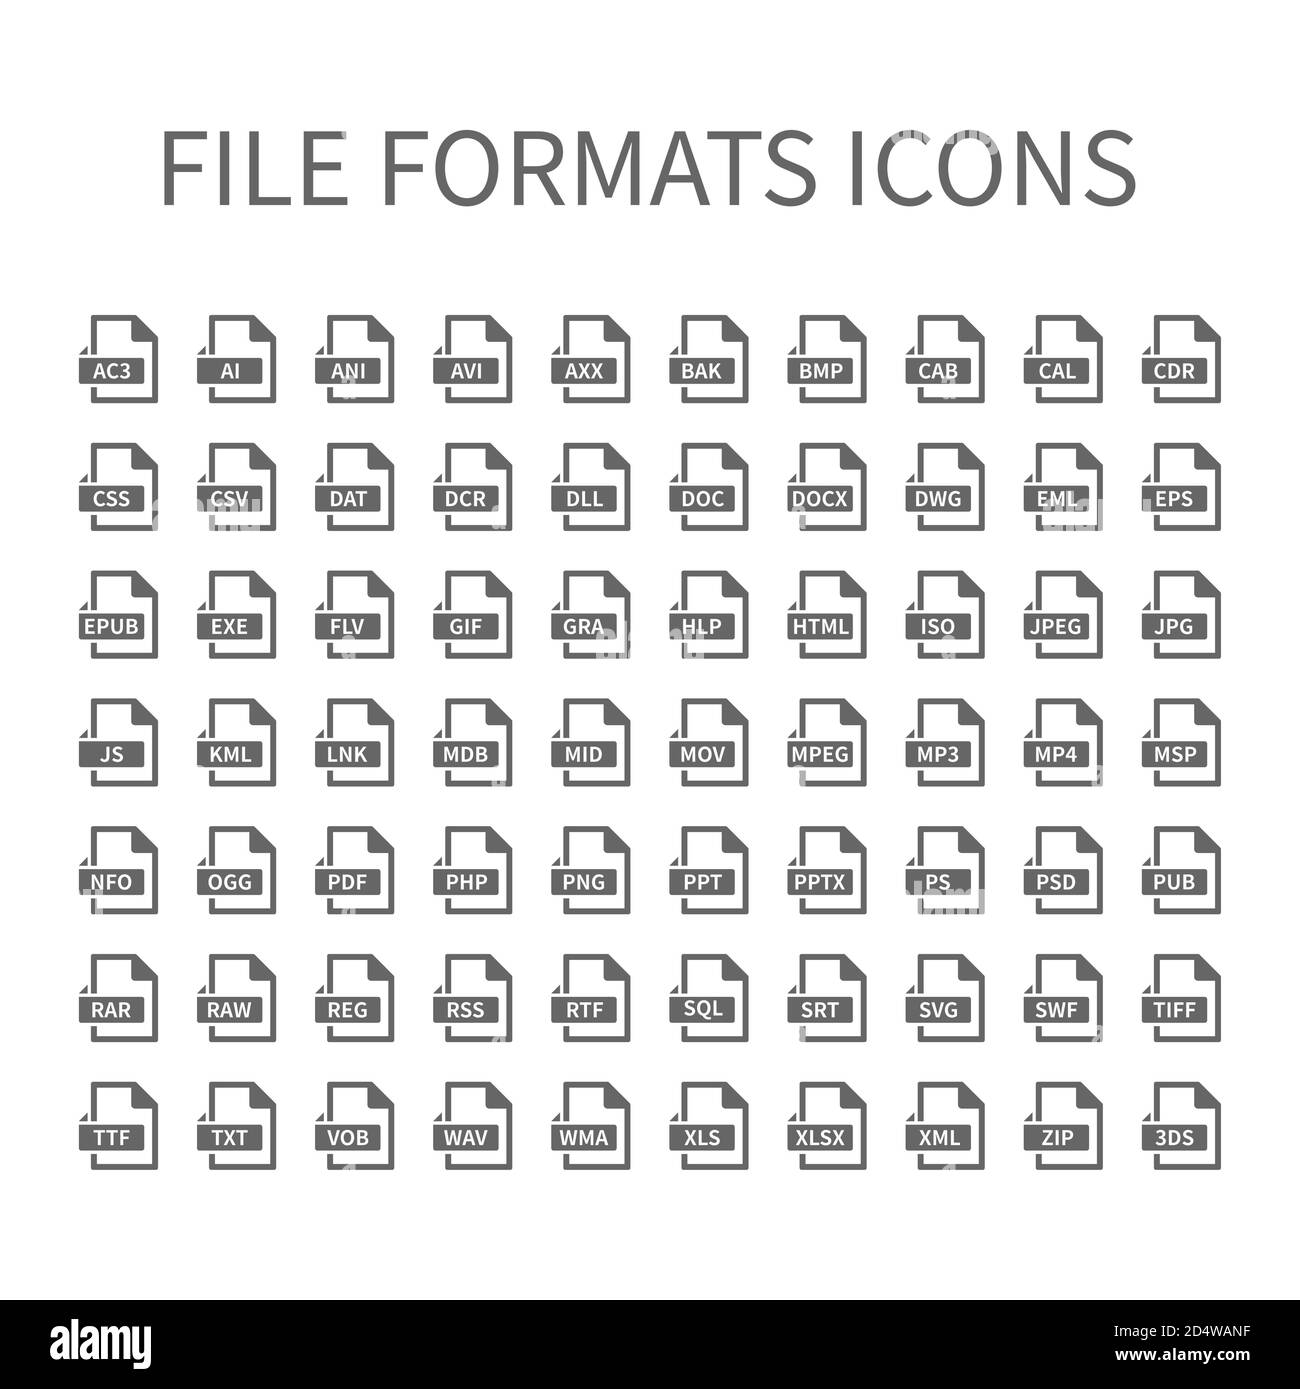 File type vector icons. File format icon set, files buttons. Stock Vector